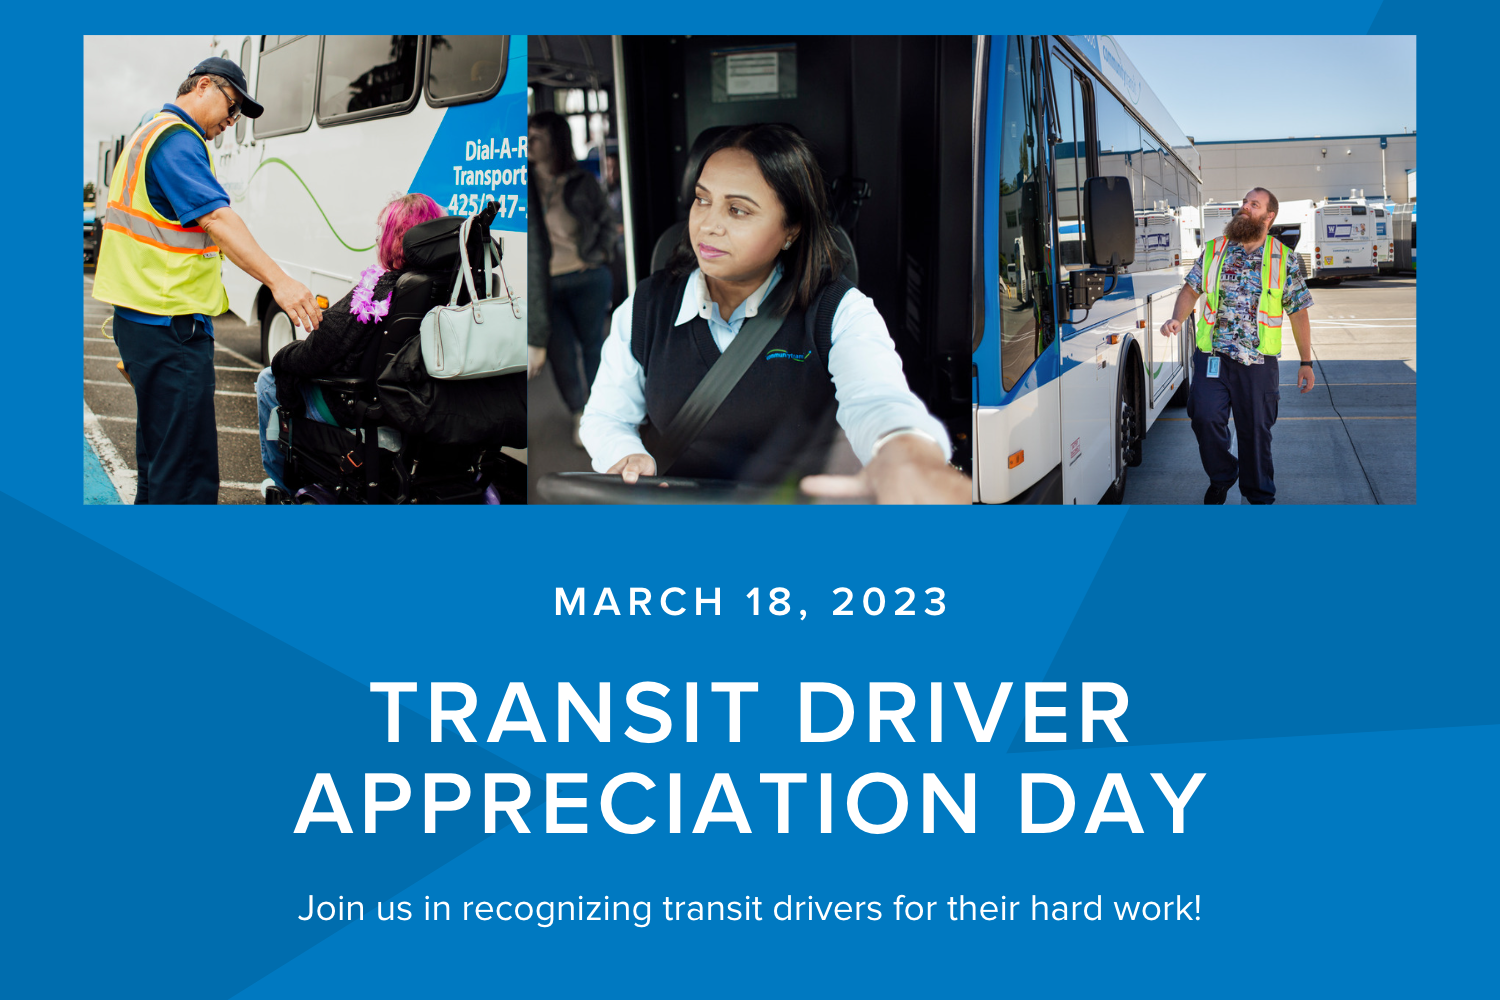 Transit Driver Appreciation Day is March 18, 2023